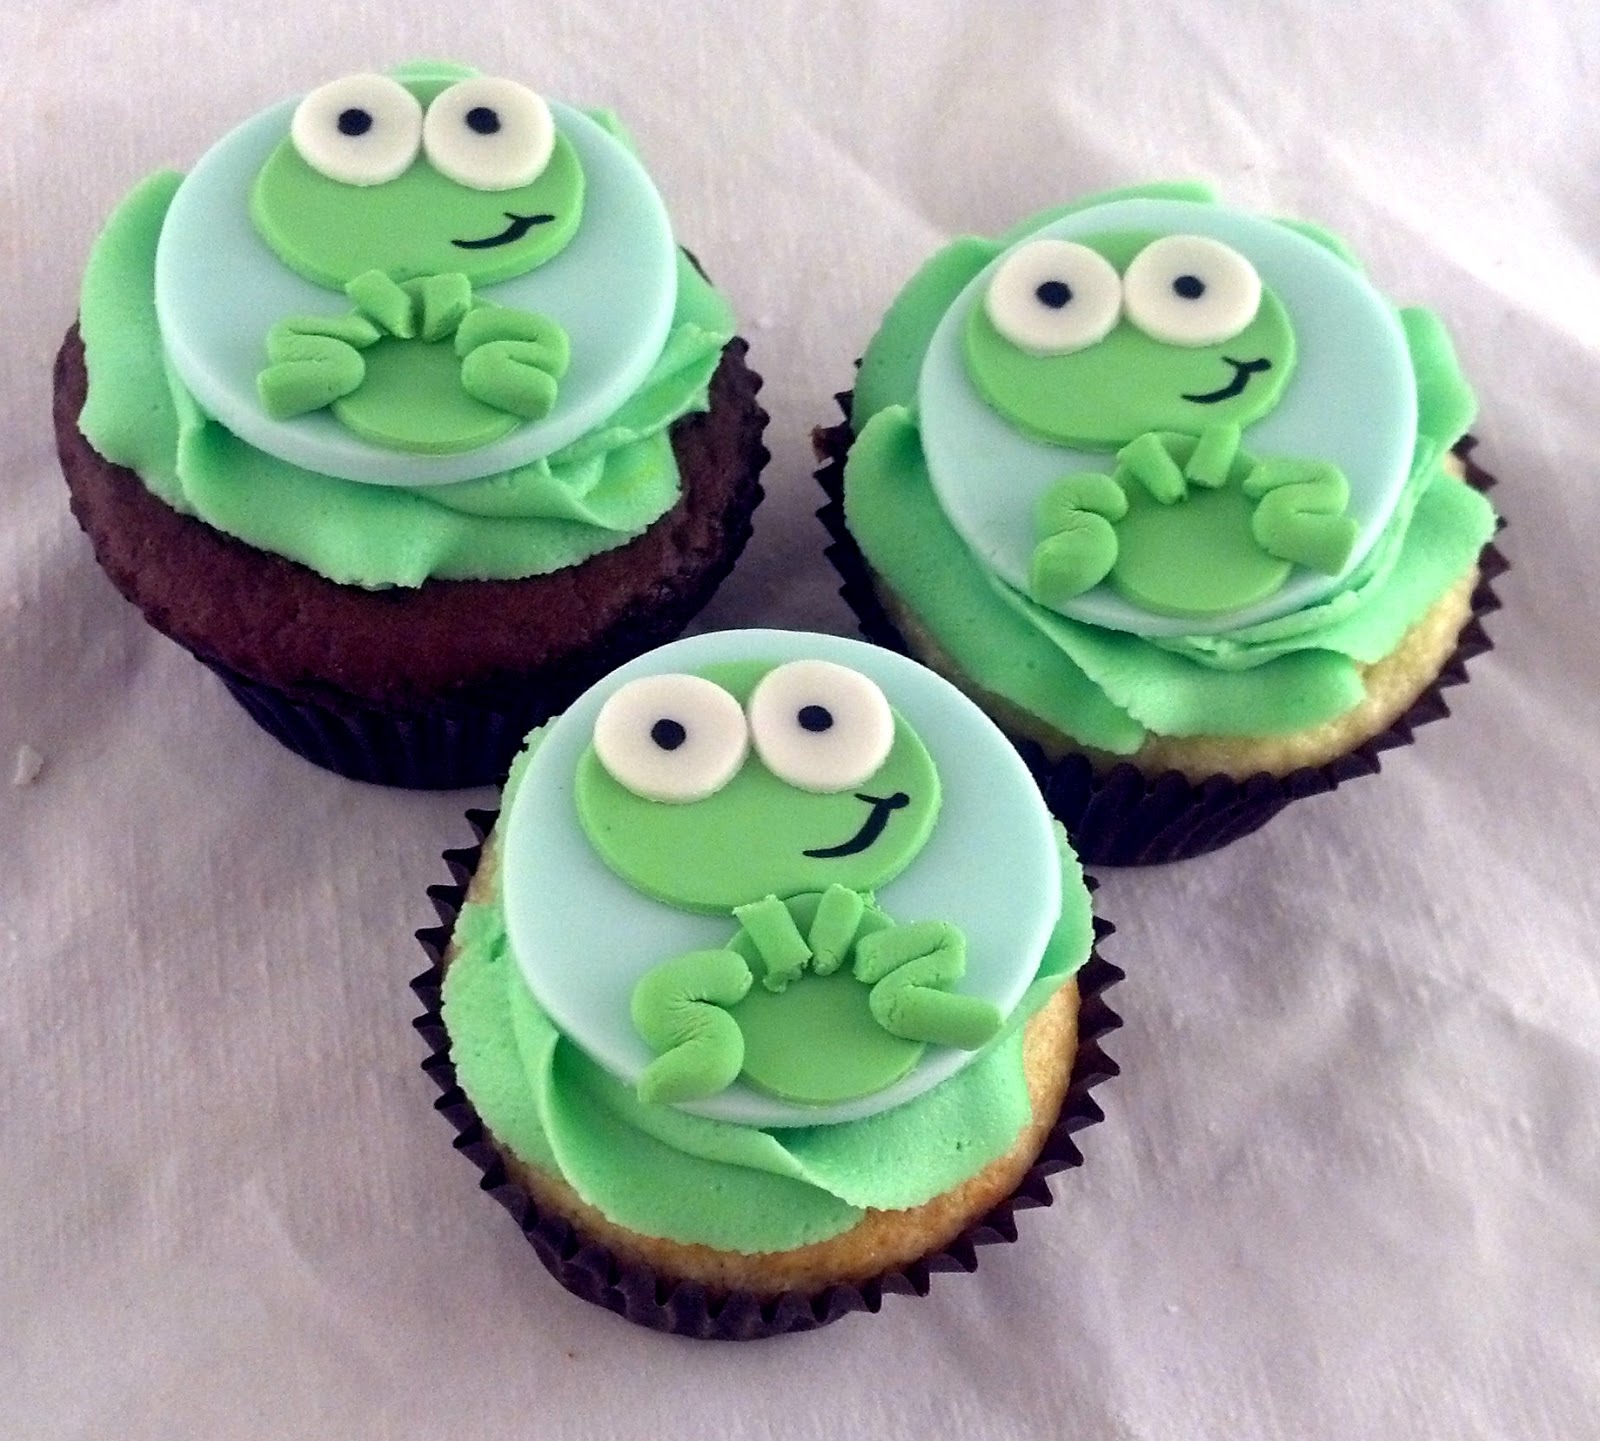 Sugar &amp; Spice Sweets: Frog Cupcakes